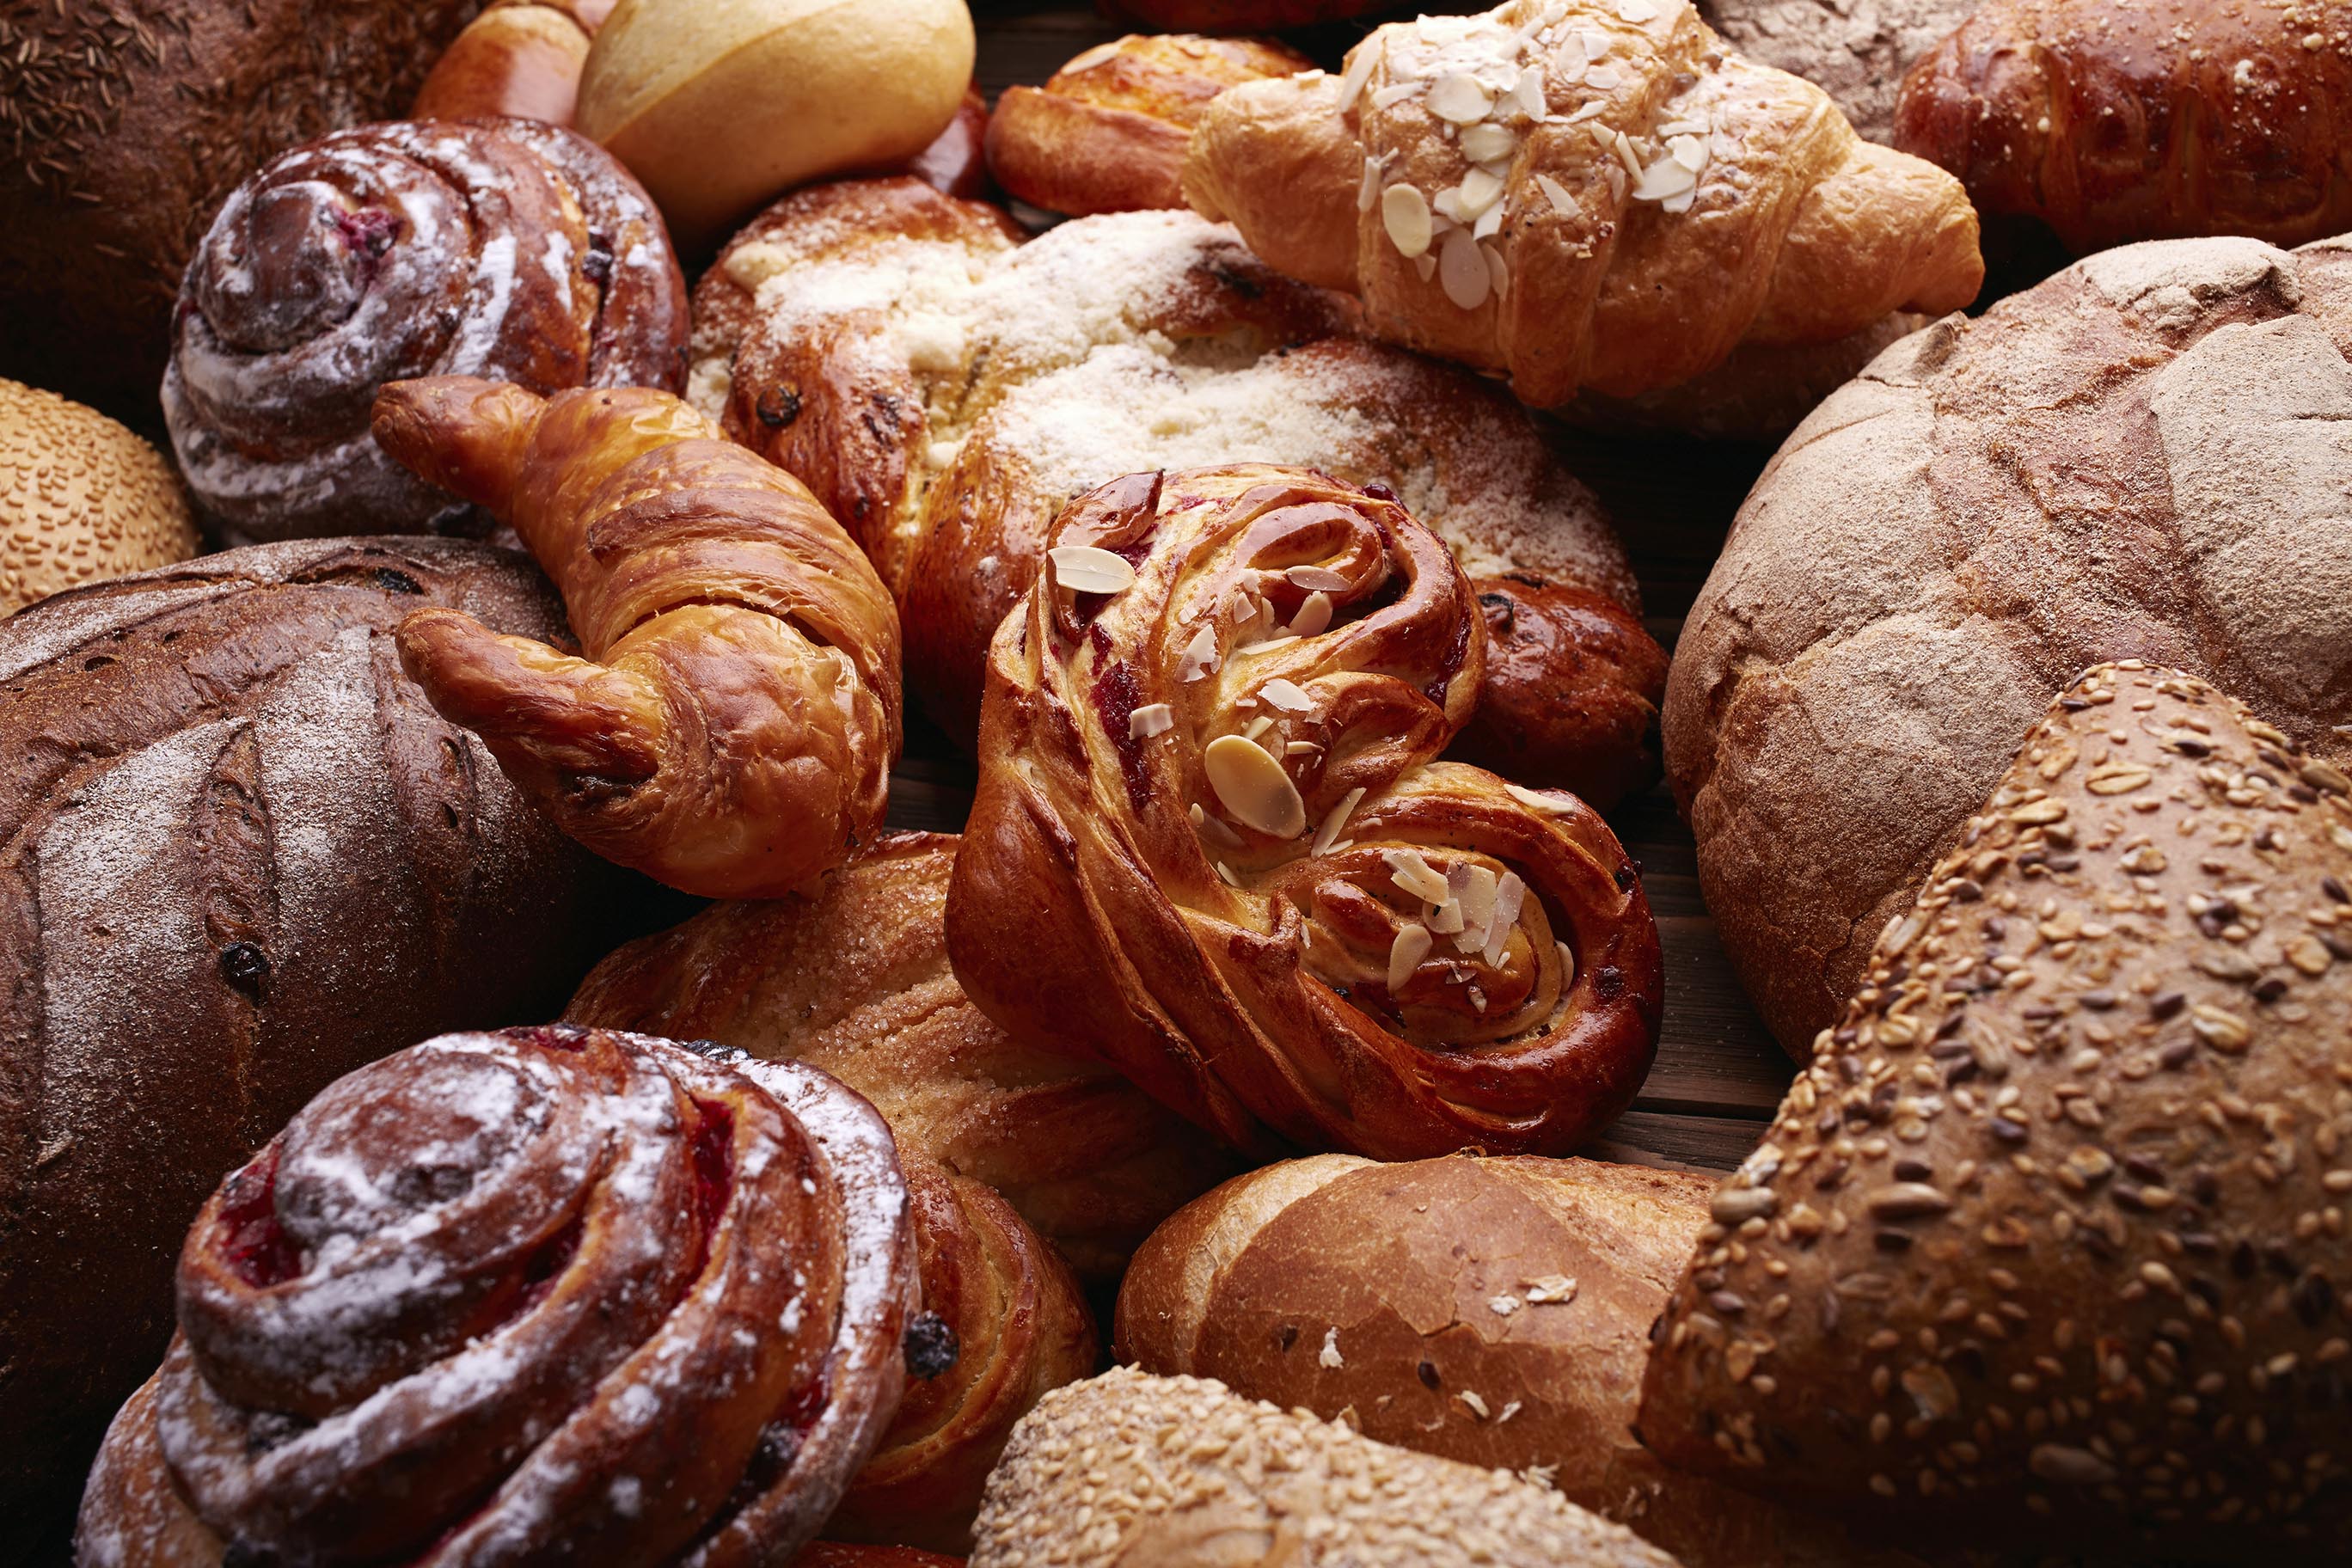 Bakery Products  Snack Food & Wholesale Bakery